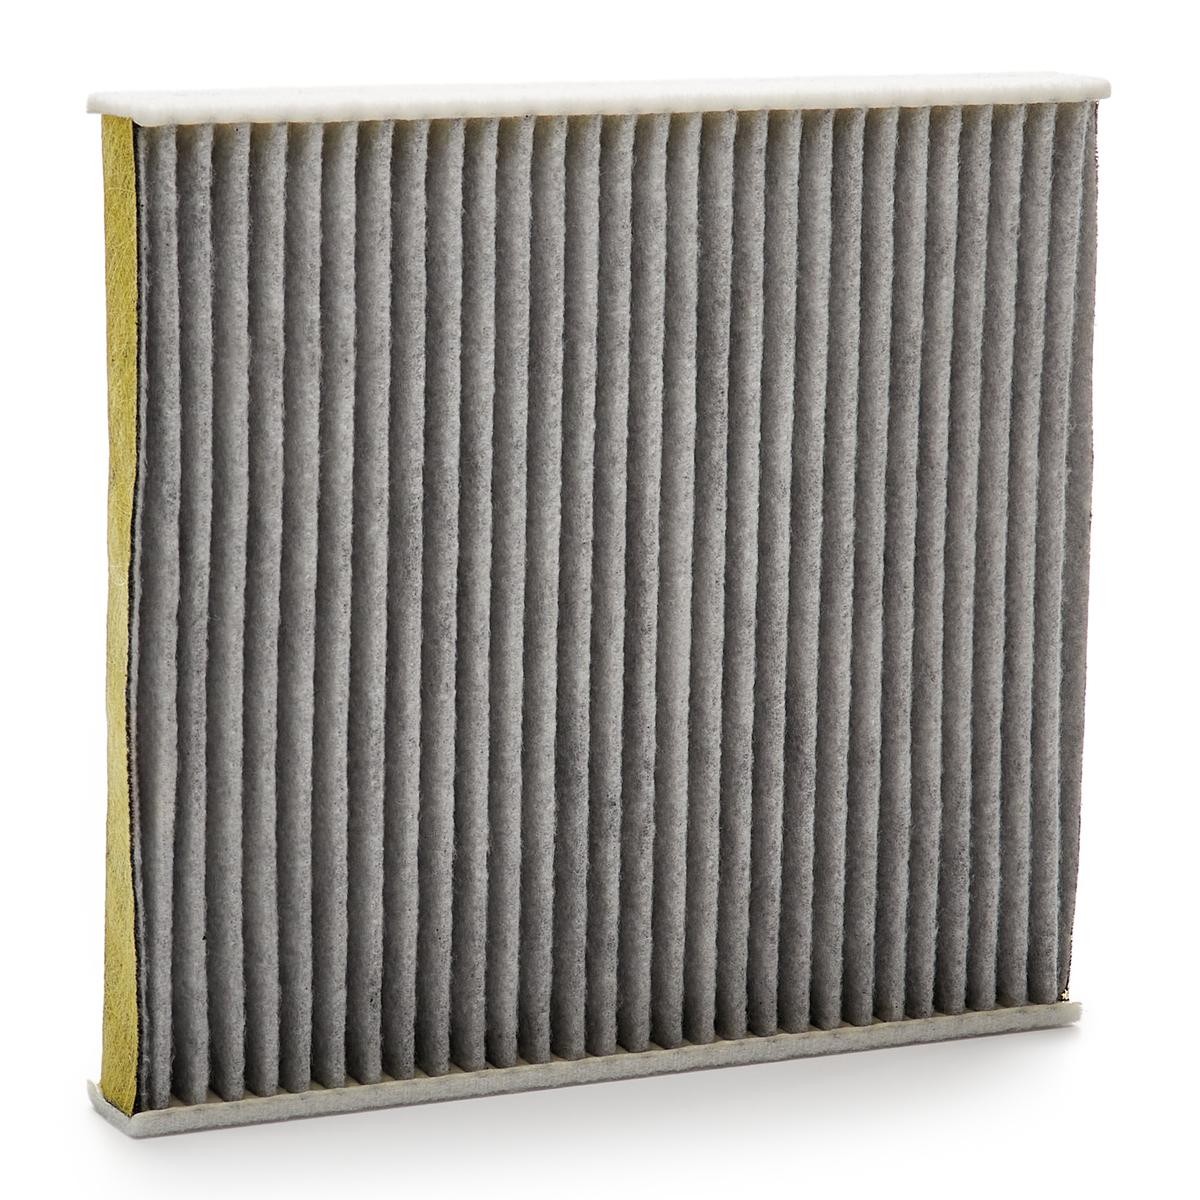 Cabin air filter FP 26 009 review